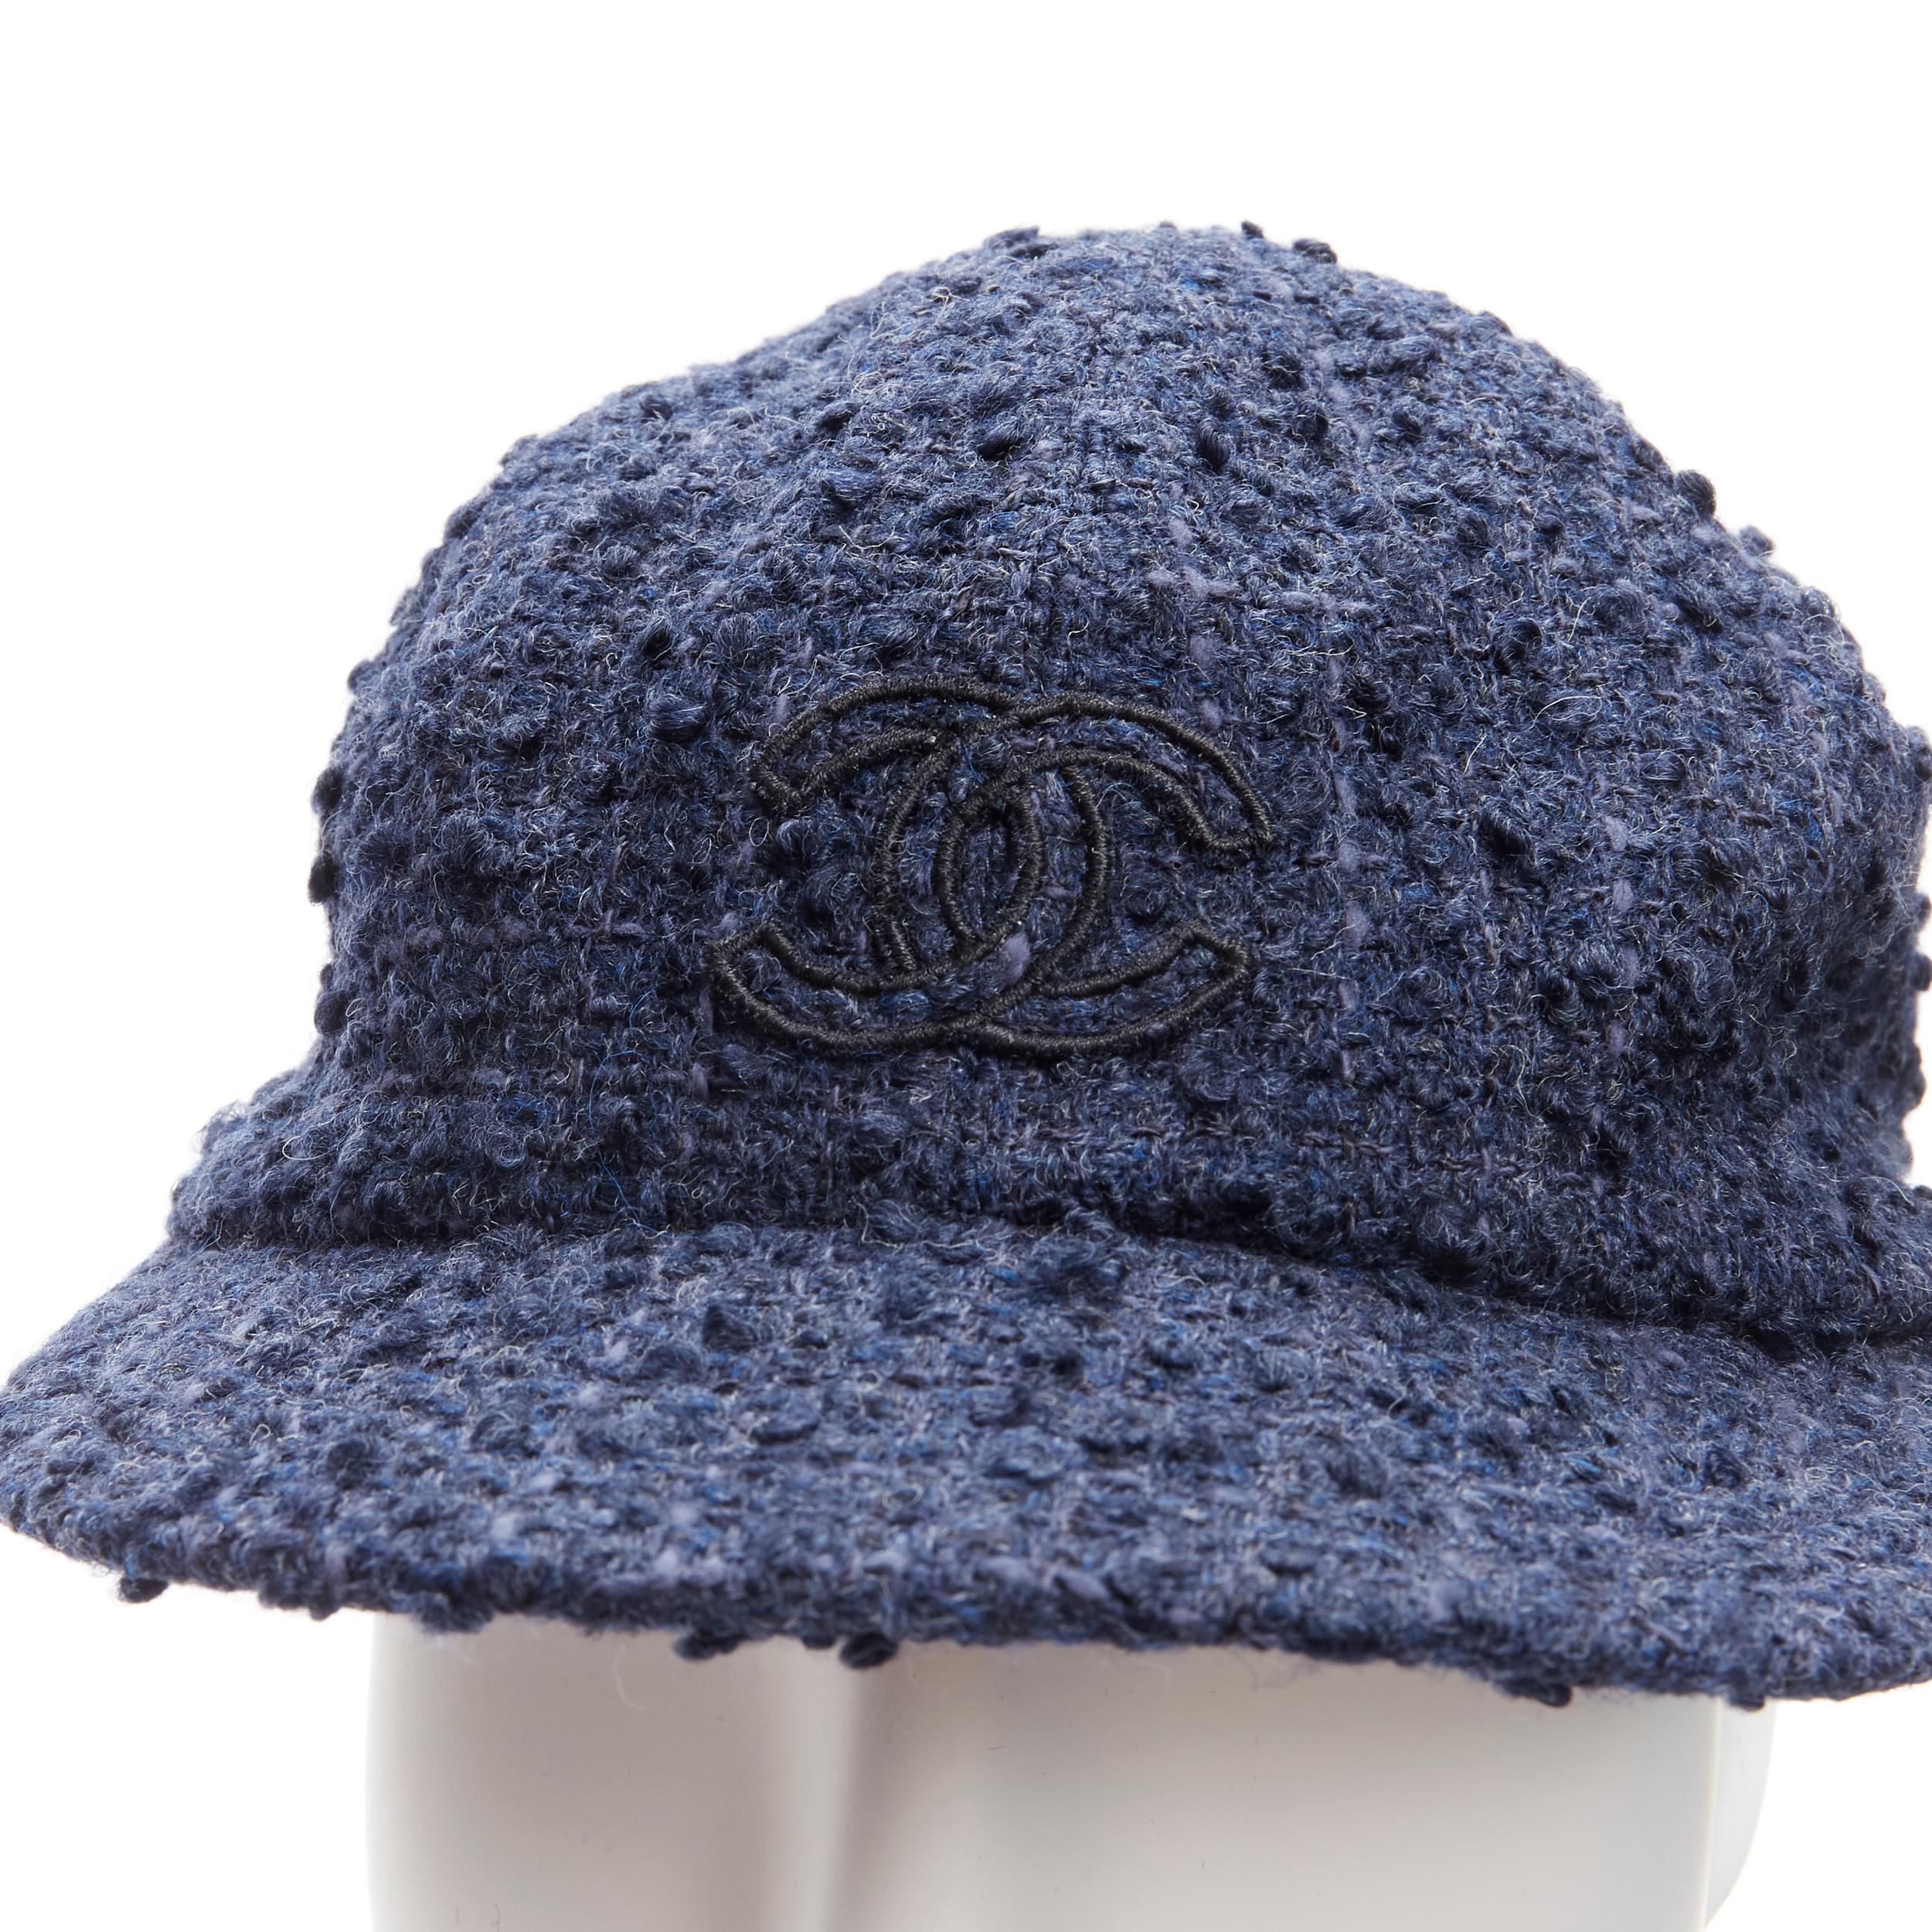 CHANEL dark blue CC interlock logo badge tweed cap hat M
Reference: AAWC/A00504
Brand: Chanel
Designer: Virginie Viard
Material: Tweed
Color: Blue
Pattern: Tweed
Closure: Slip On
Lining: Black Fabric
Made in: France

CONDITION:
Condition: Excellent,